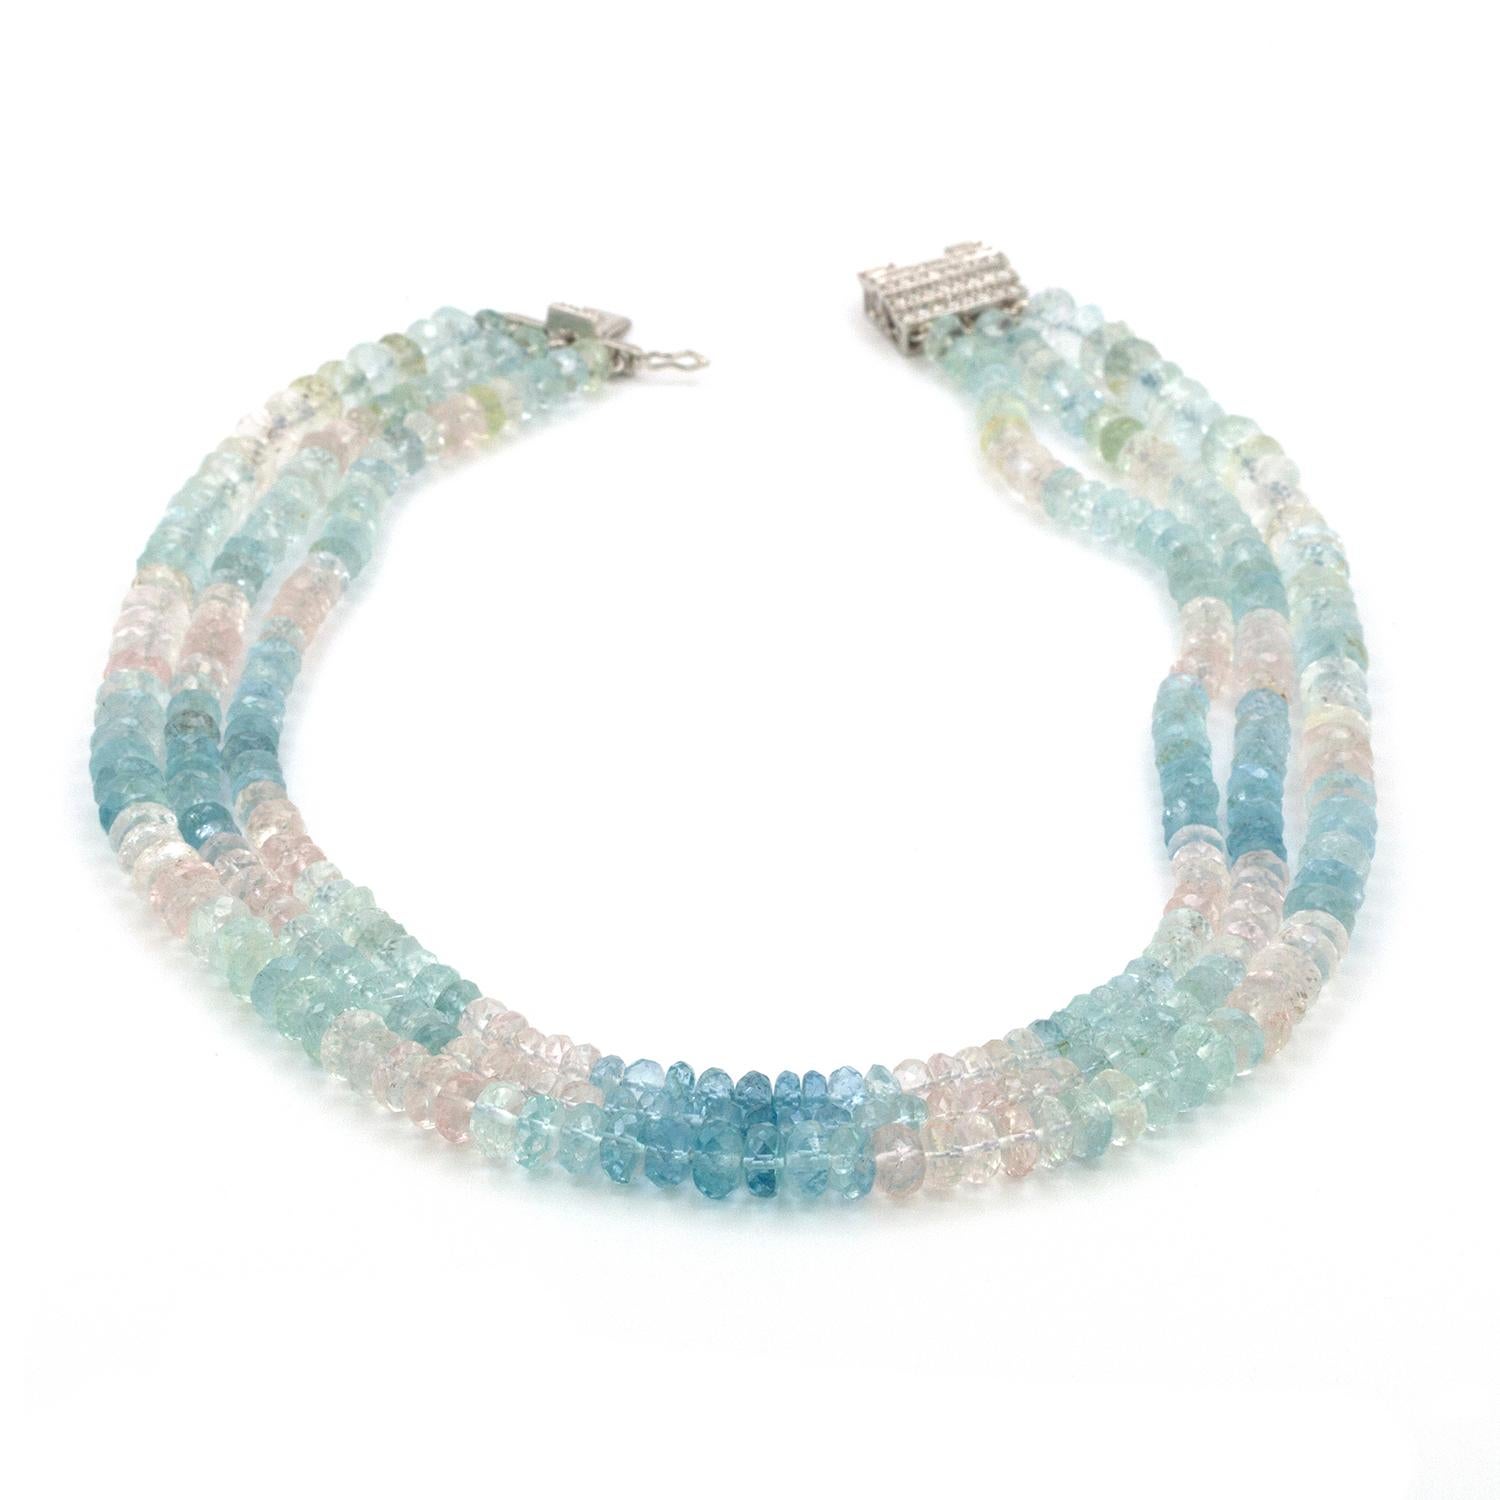 A 300 carat Aquamarine and Pink Topaz 3 strand necklace that is comprised of 5.50 - 7.75 mm briolette cut Aquamarine and Pink Topaz, connected with a 18k white gold, diamond clasp that contains 40 rbc diamonds that weigh approximately 1 ct and